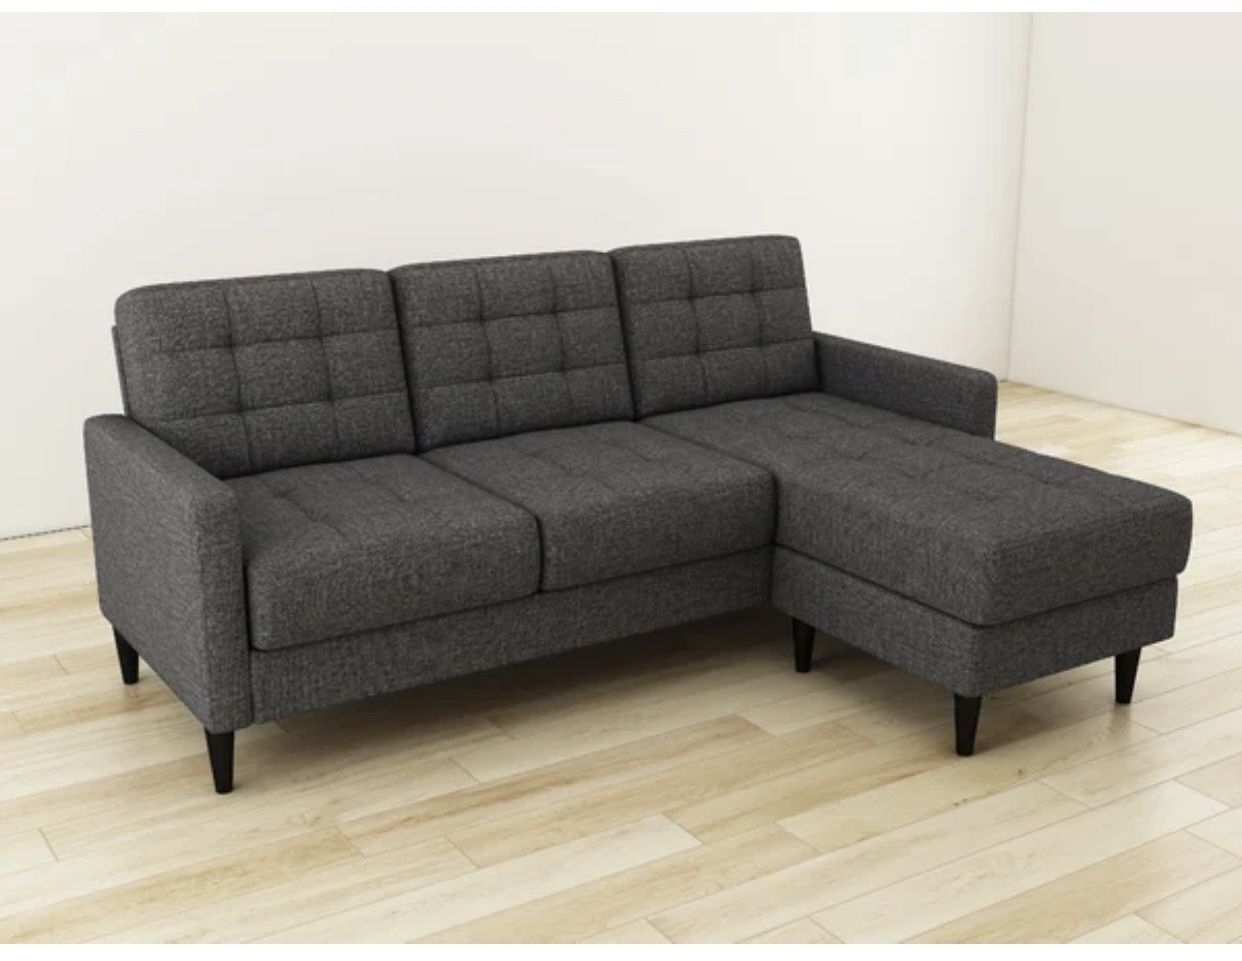 Ashland 82" Wide Reversible Sofa & Chaise with Ottoman